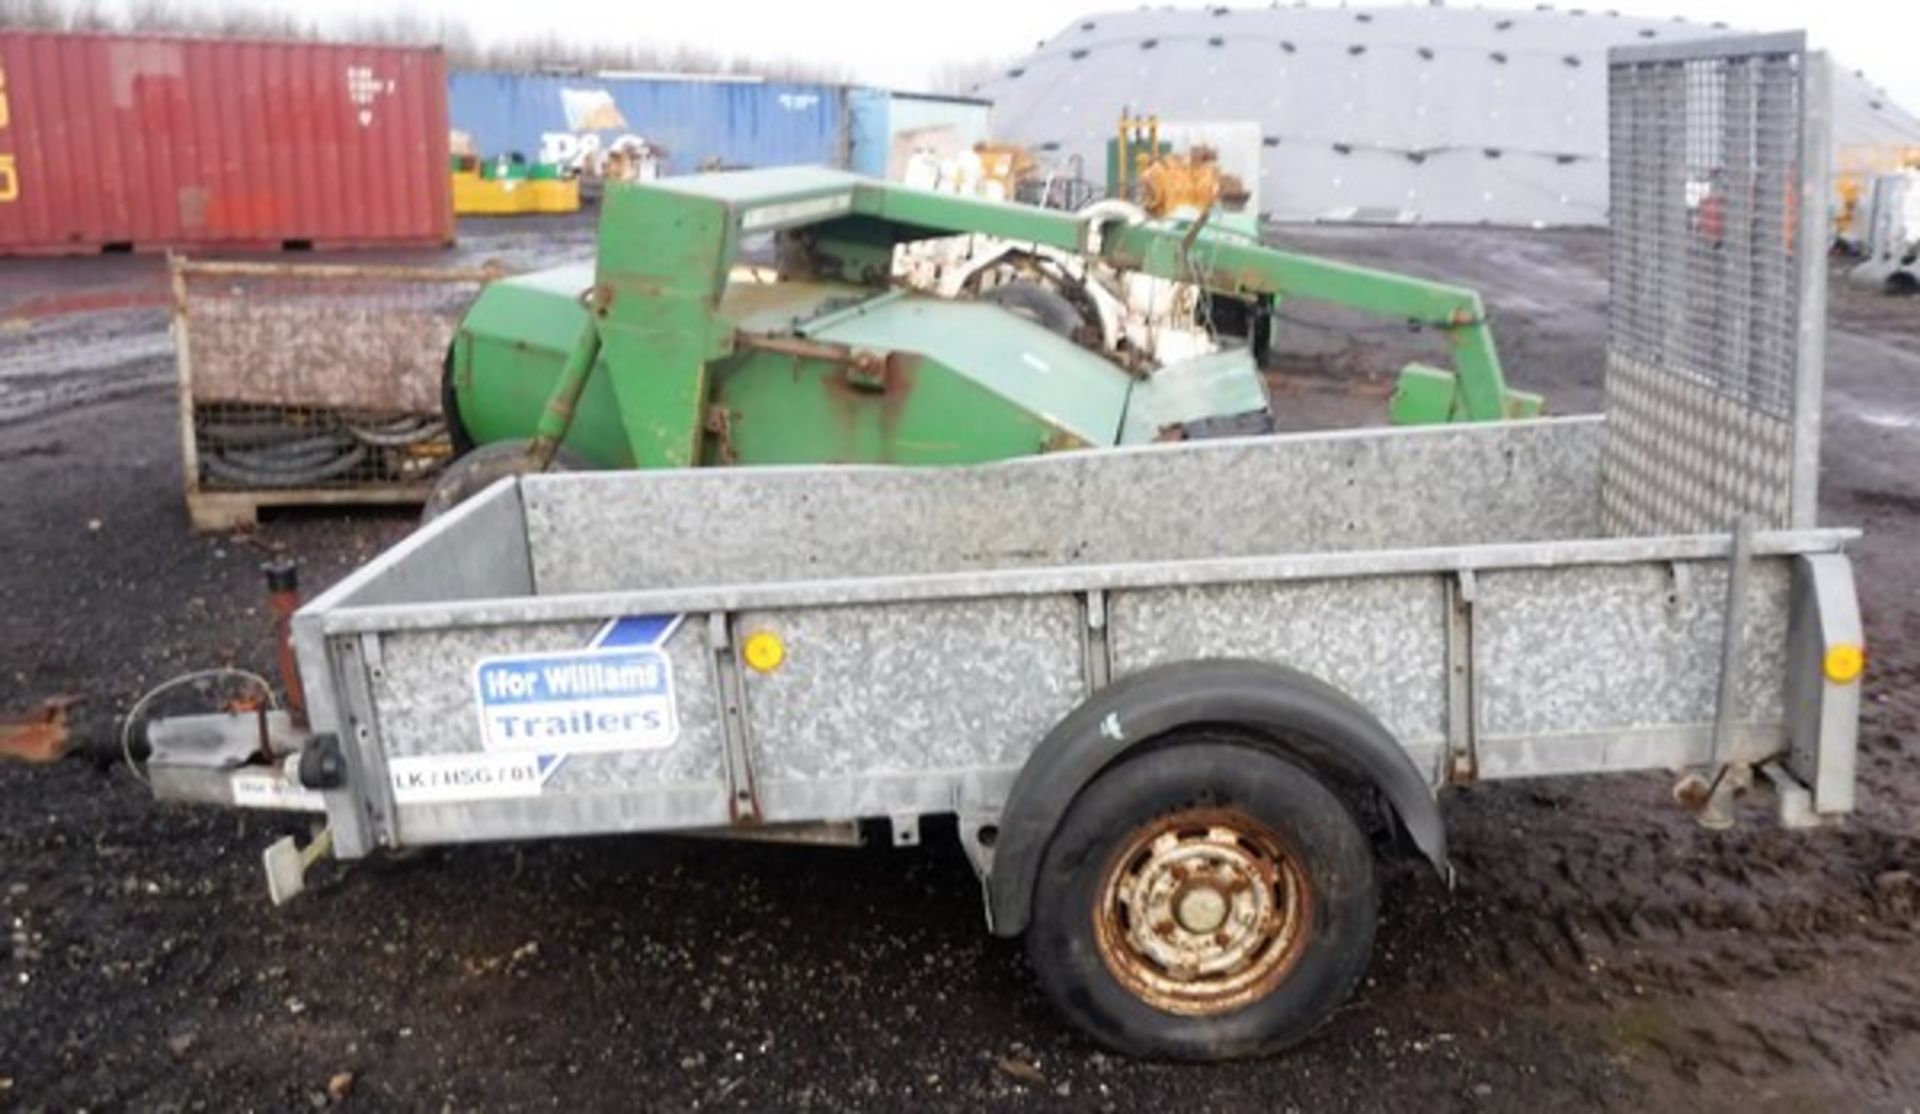 IVOR WILLIAMS 8' X 4' SINGLE AXLE TRAILER WITHREAR TAILGATE, S/N - LK/HSG/01 - Image 2 of 6